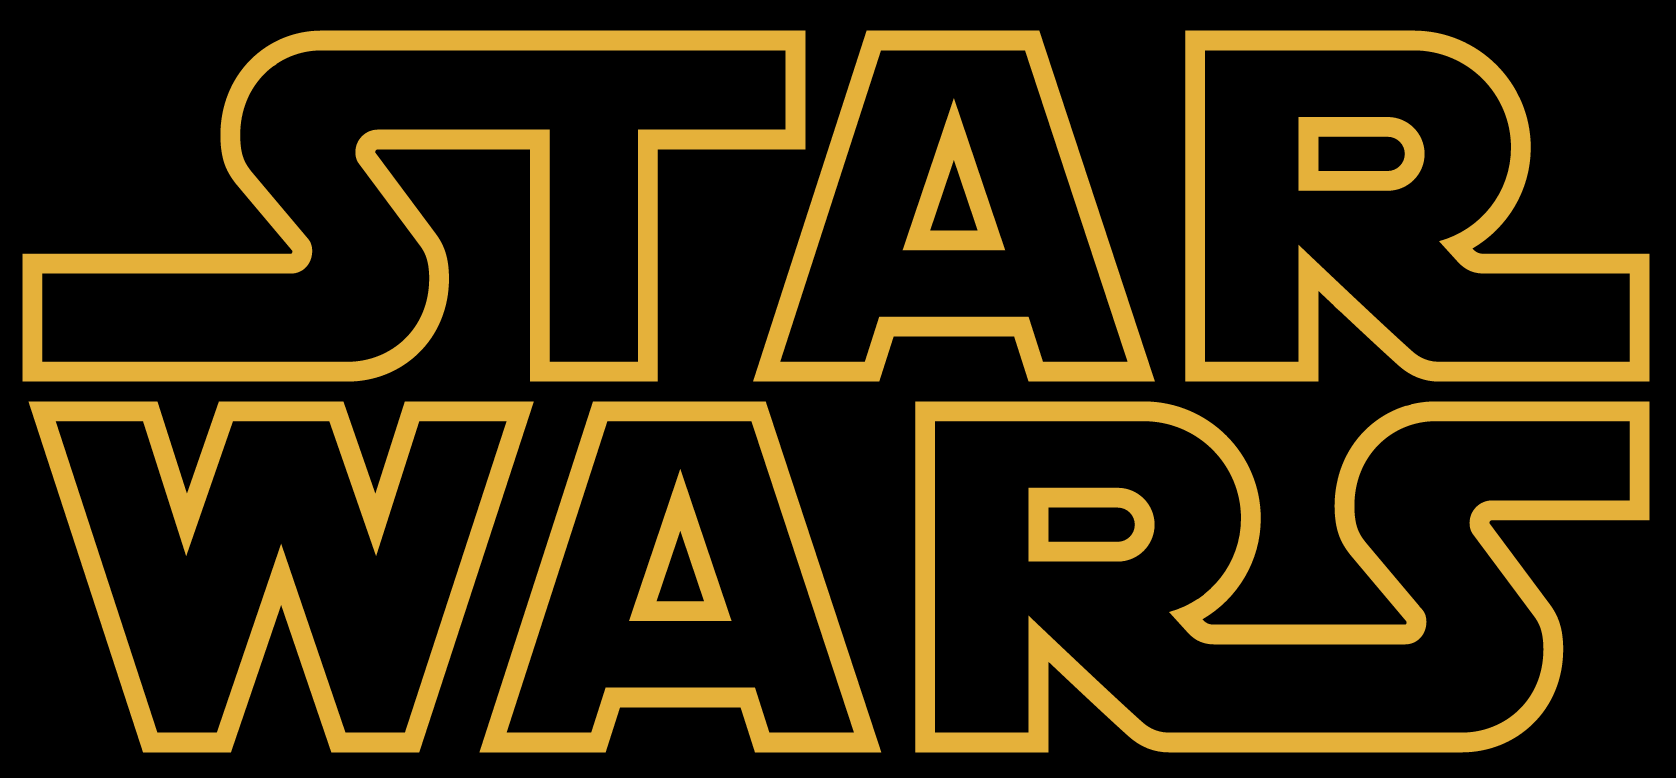 Movie News: New Star Wars films to come out every summer starting in 2015